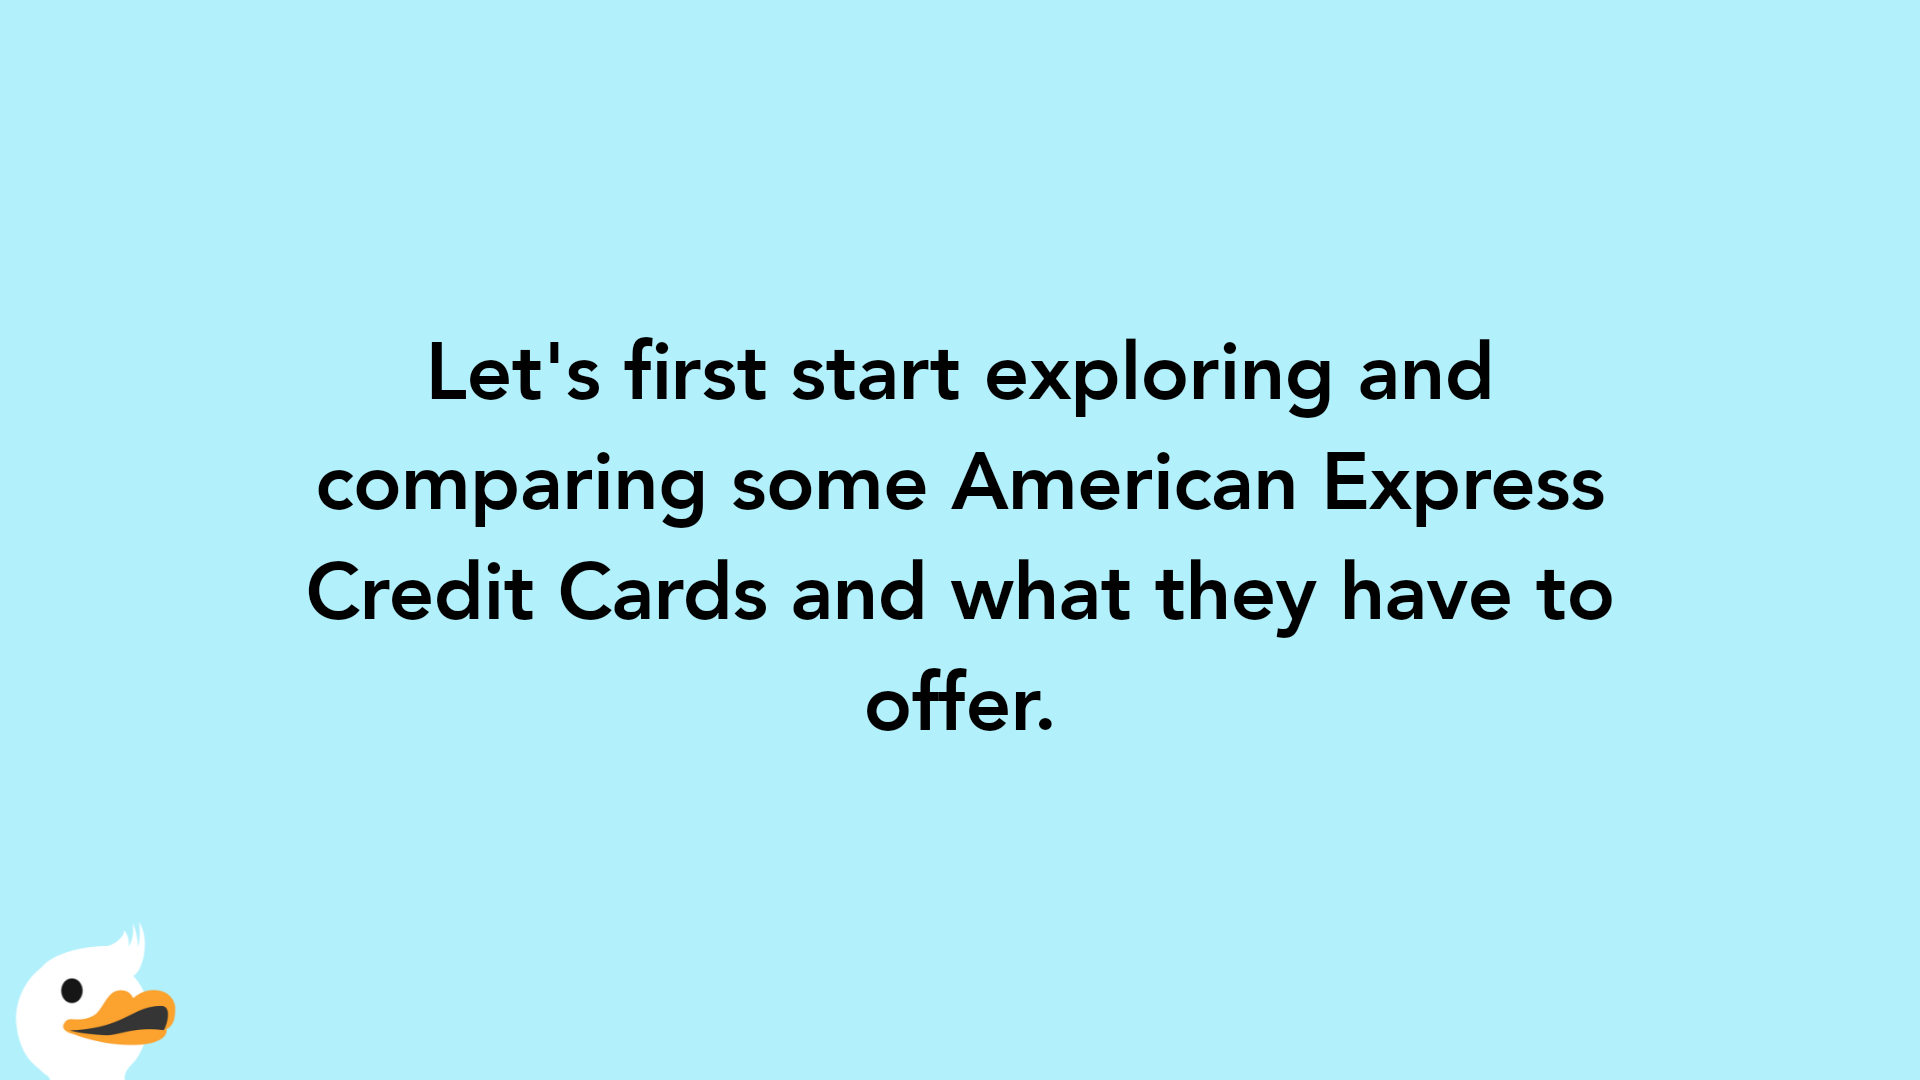 Let's first start exploring and comparing some American Express Credit Cards and what they have to offer.